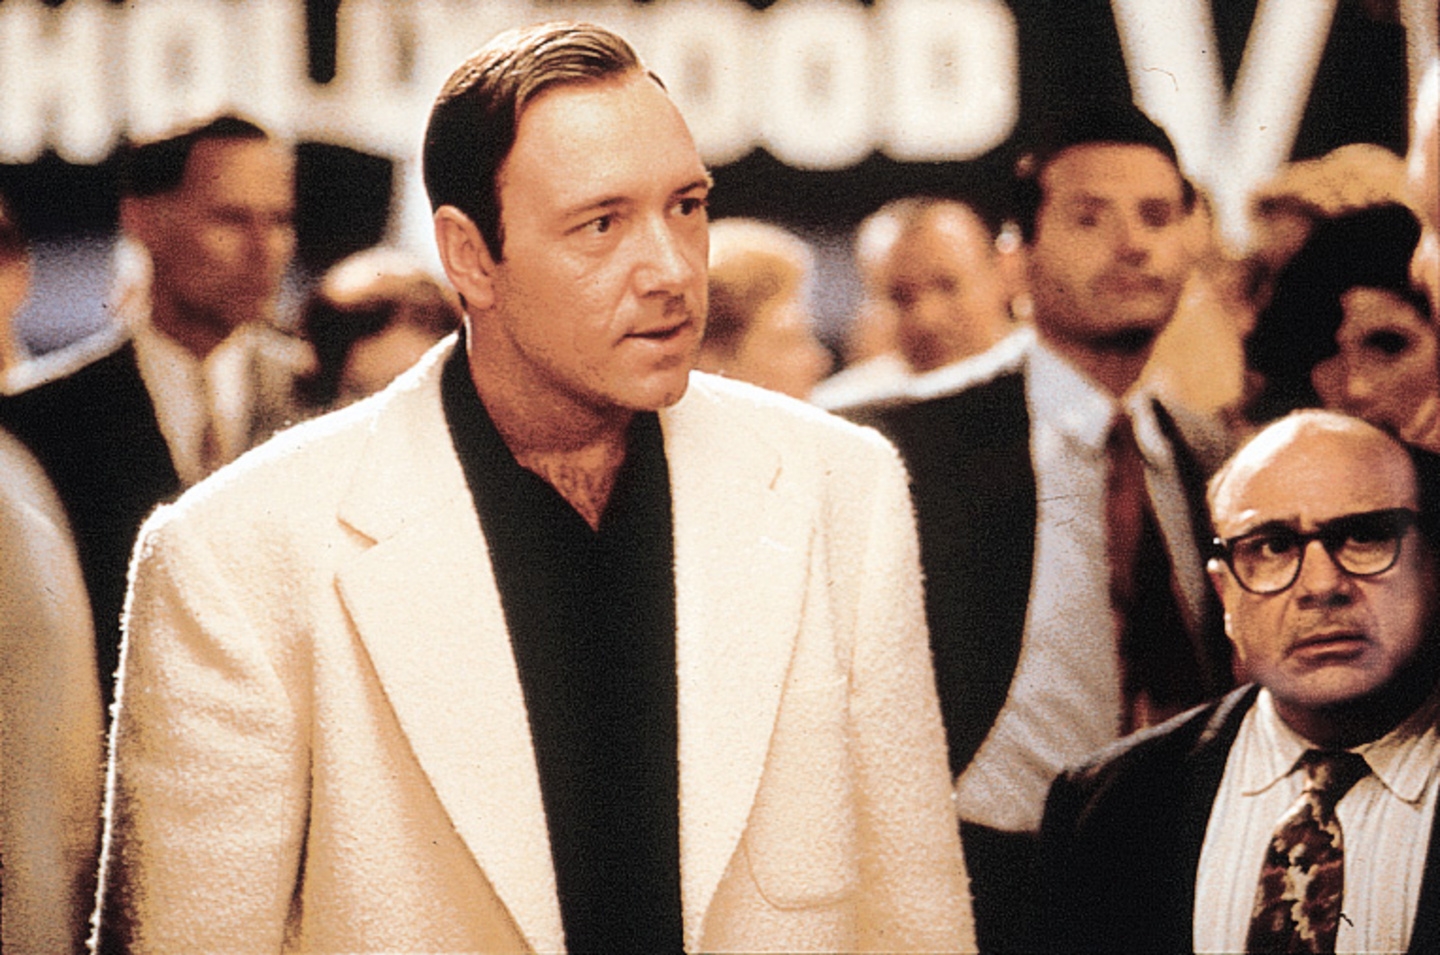 L.A. Confidential / Kevin Spacey